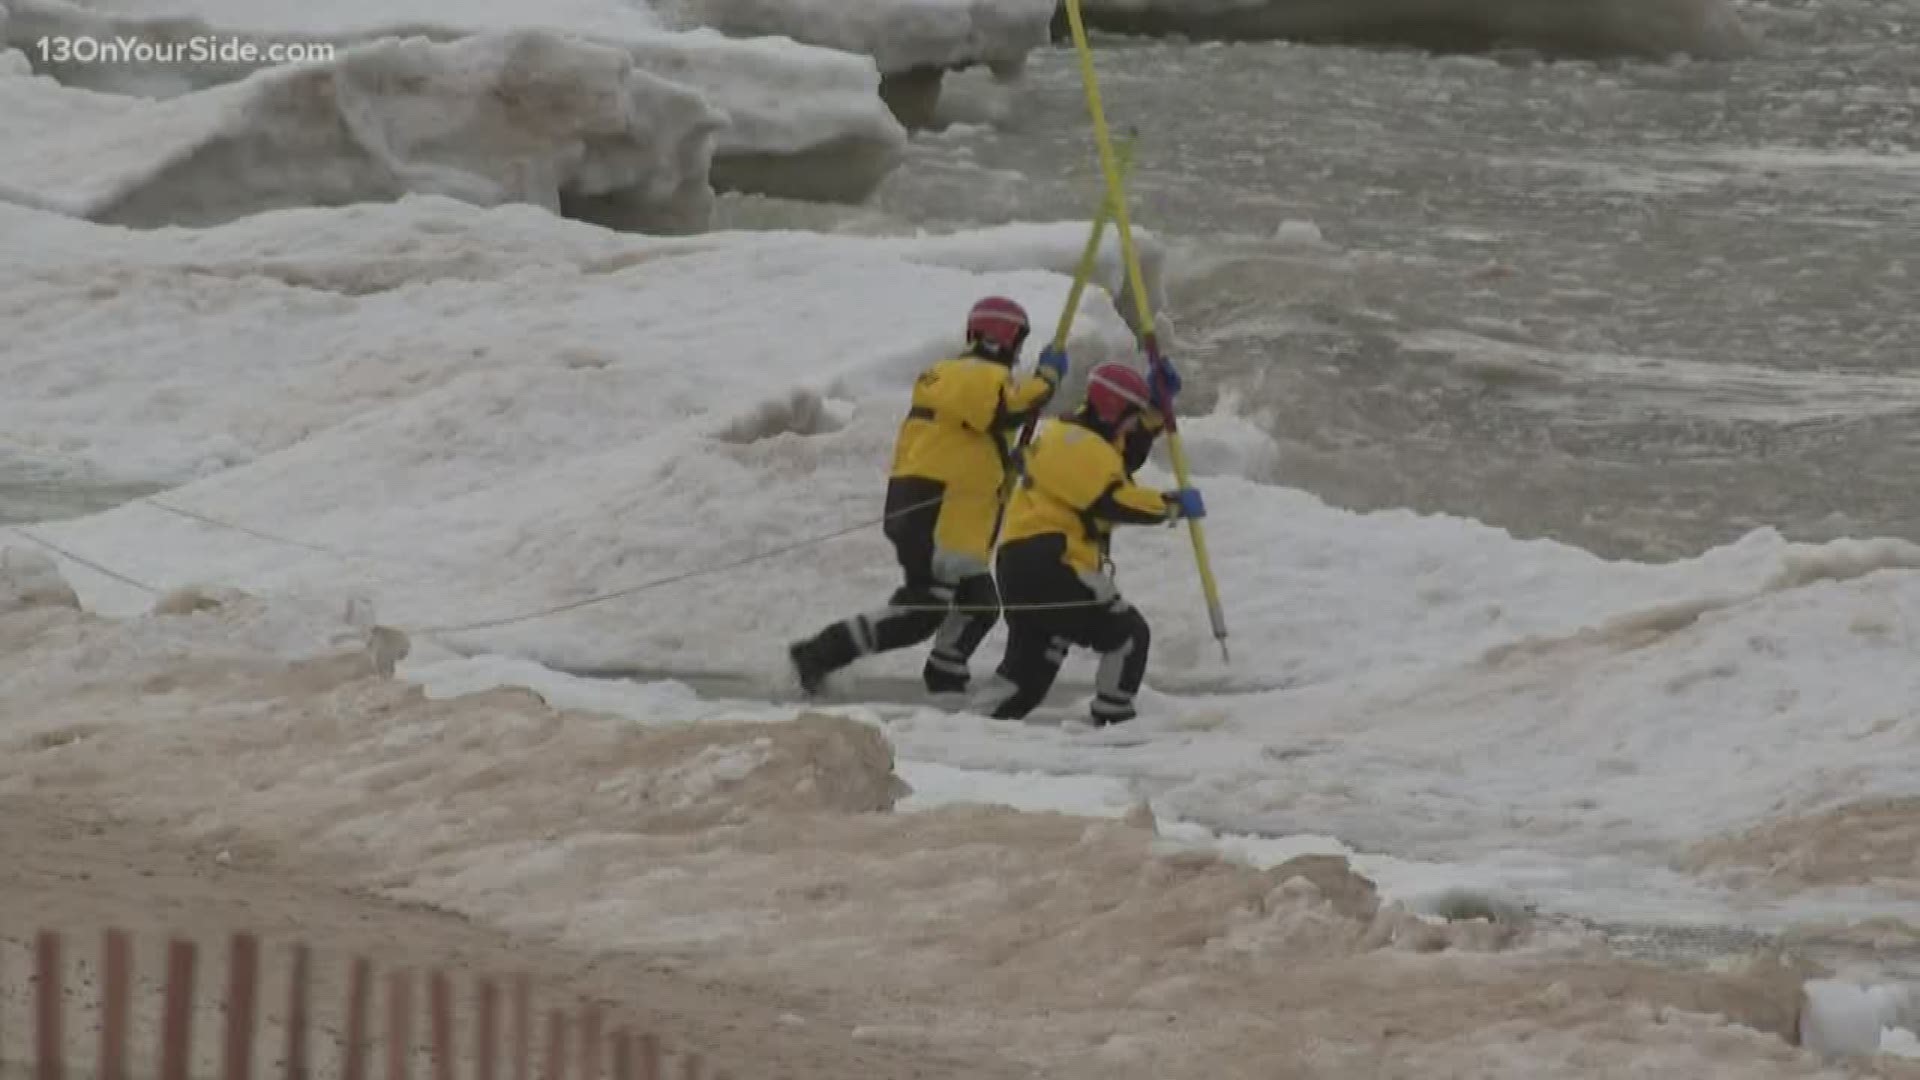 Ramal Roby fell through the ice on Lake Michigan after he was walking the beach.